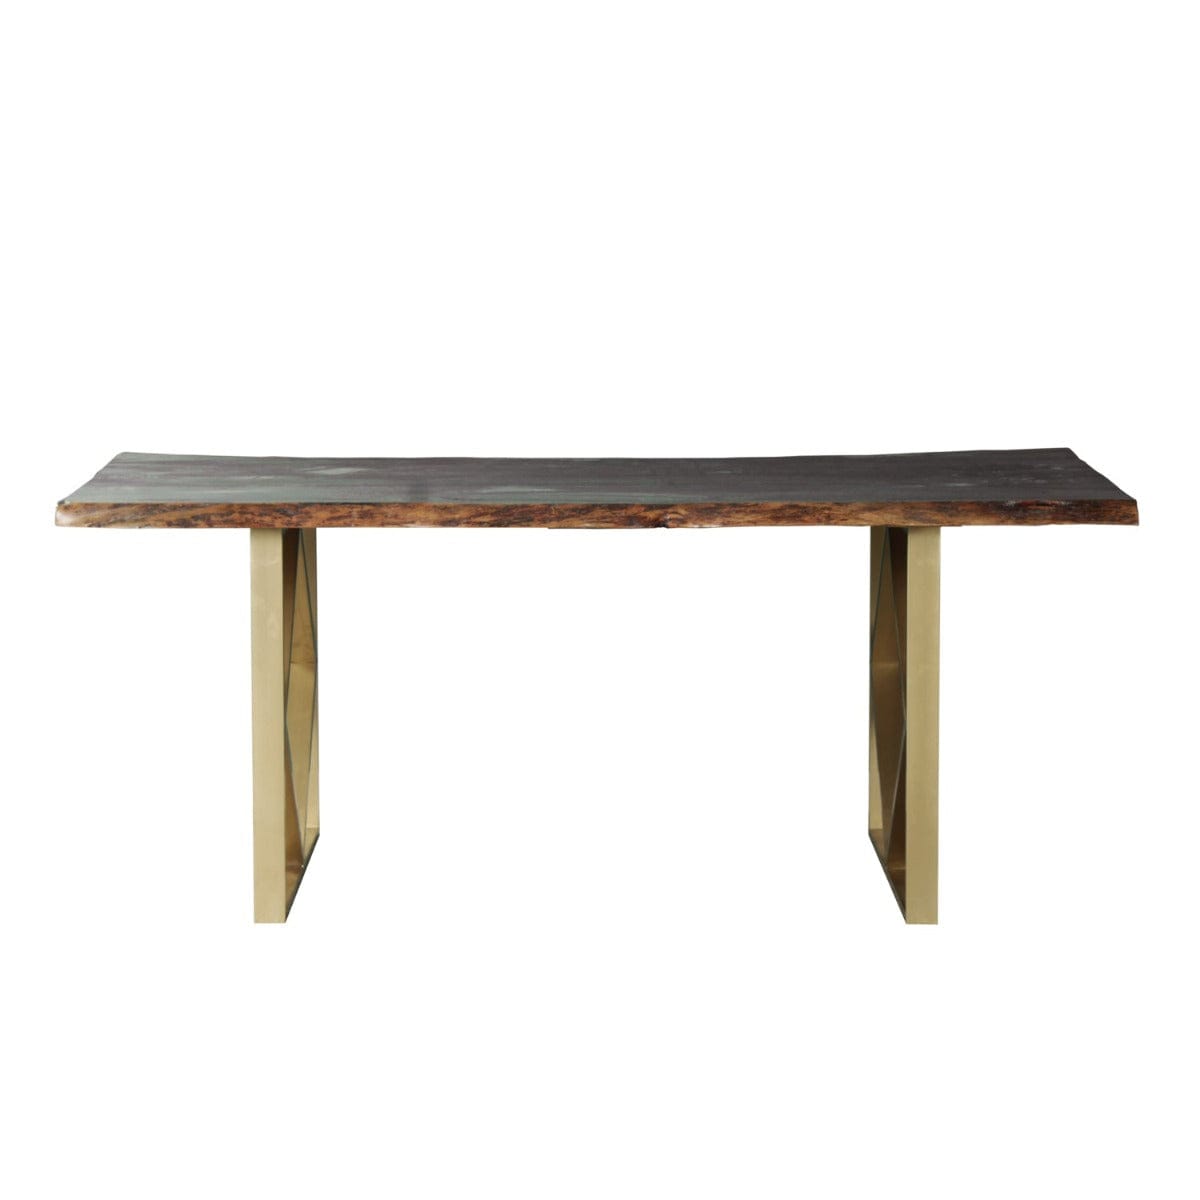 Tabak 6 Seater Wooden Dining Table In Gold Finish